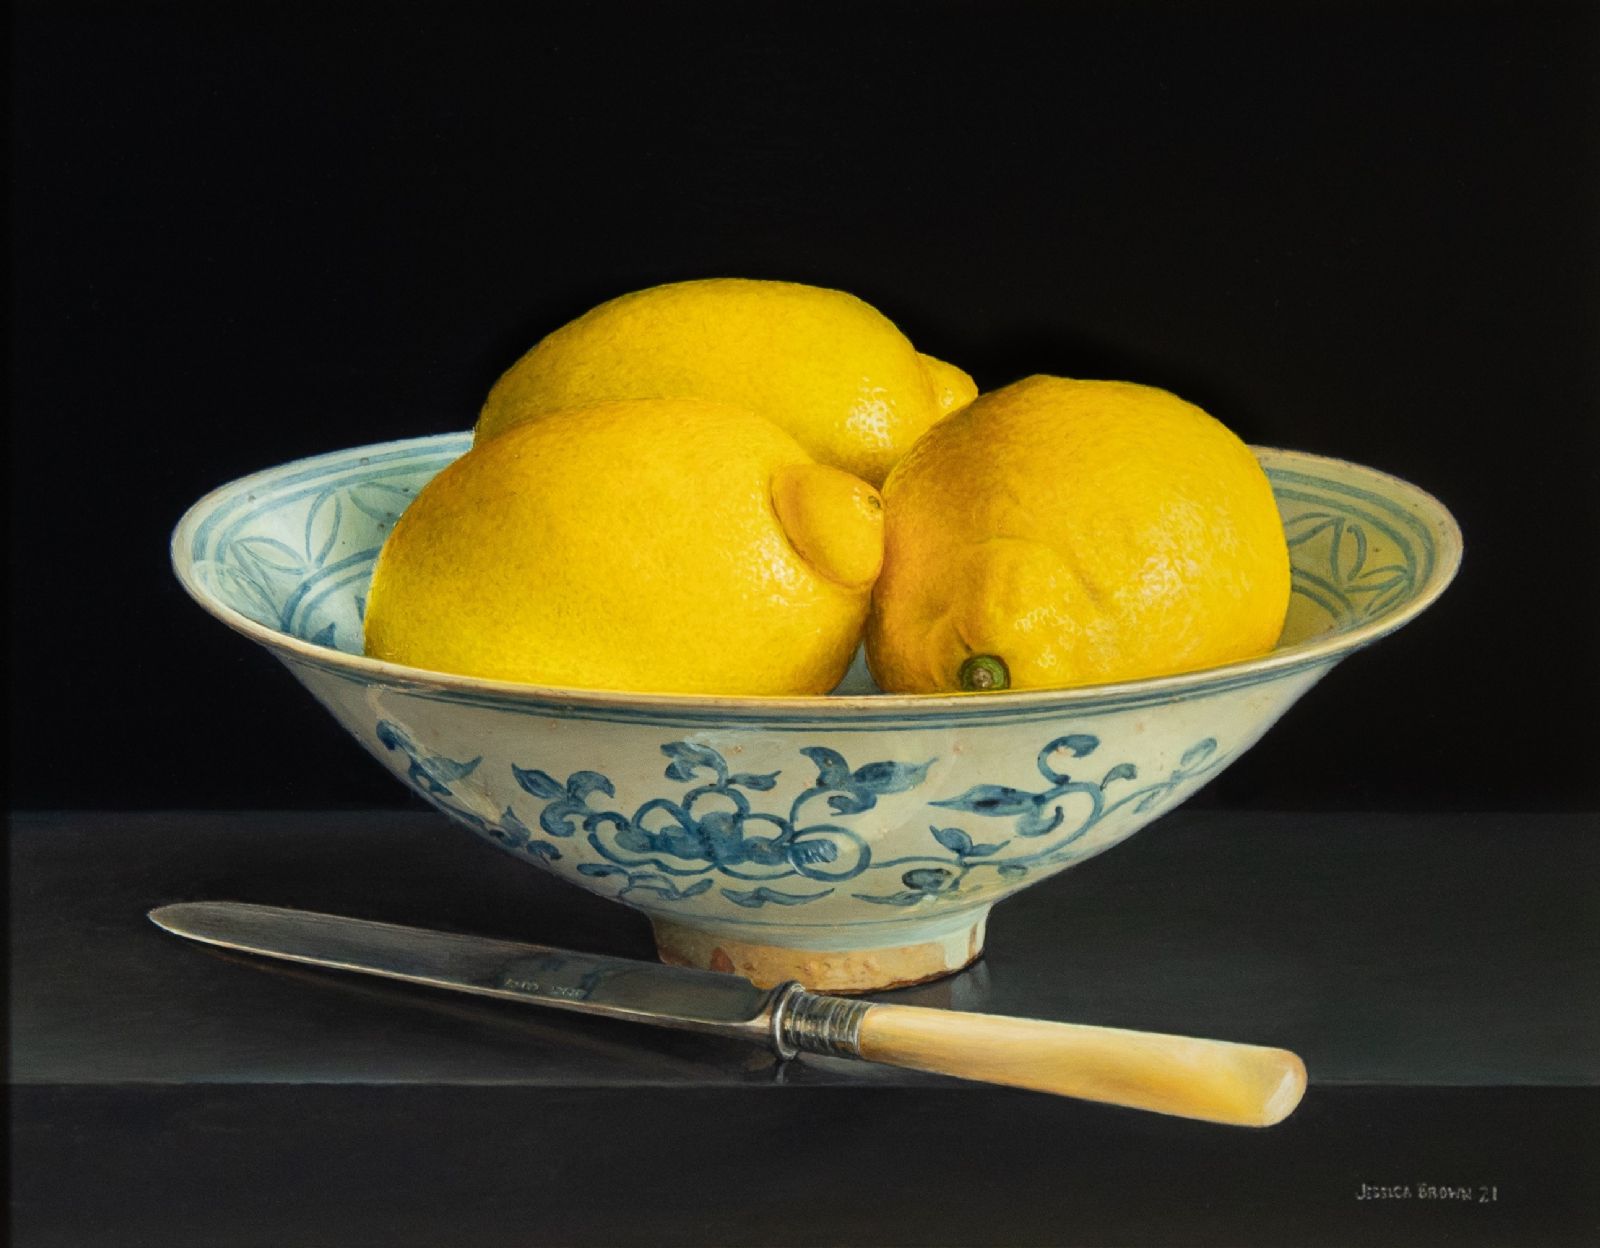 Still Life with Three Lemons in a Chinese Bowl and Fruit Knife  by Jessica Brown